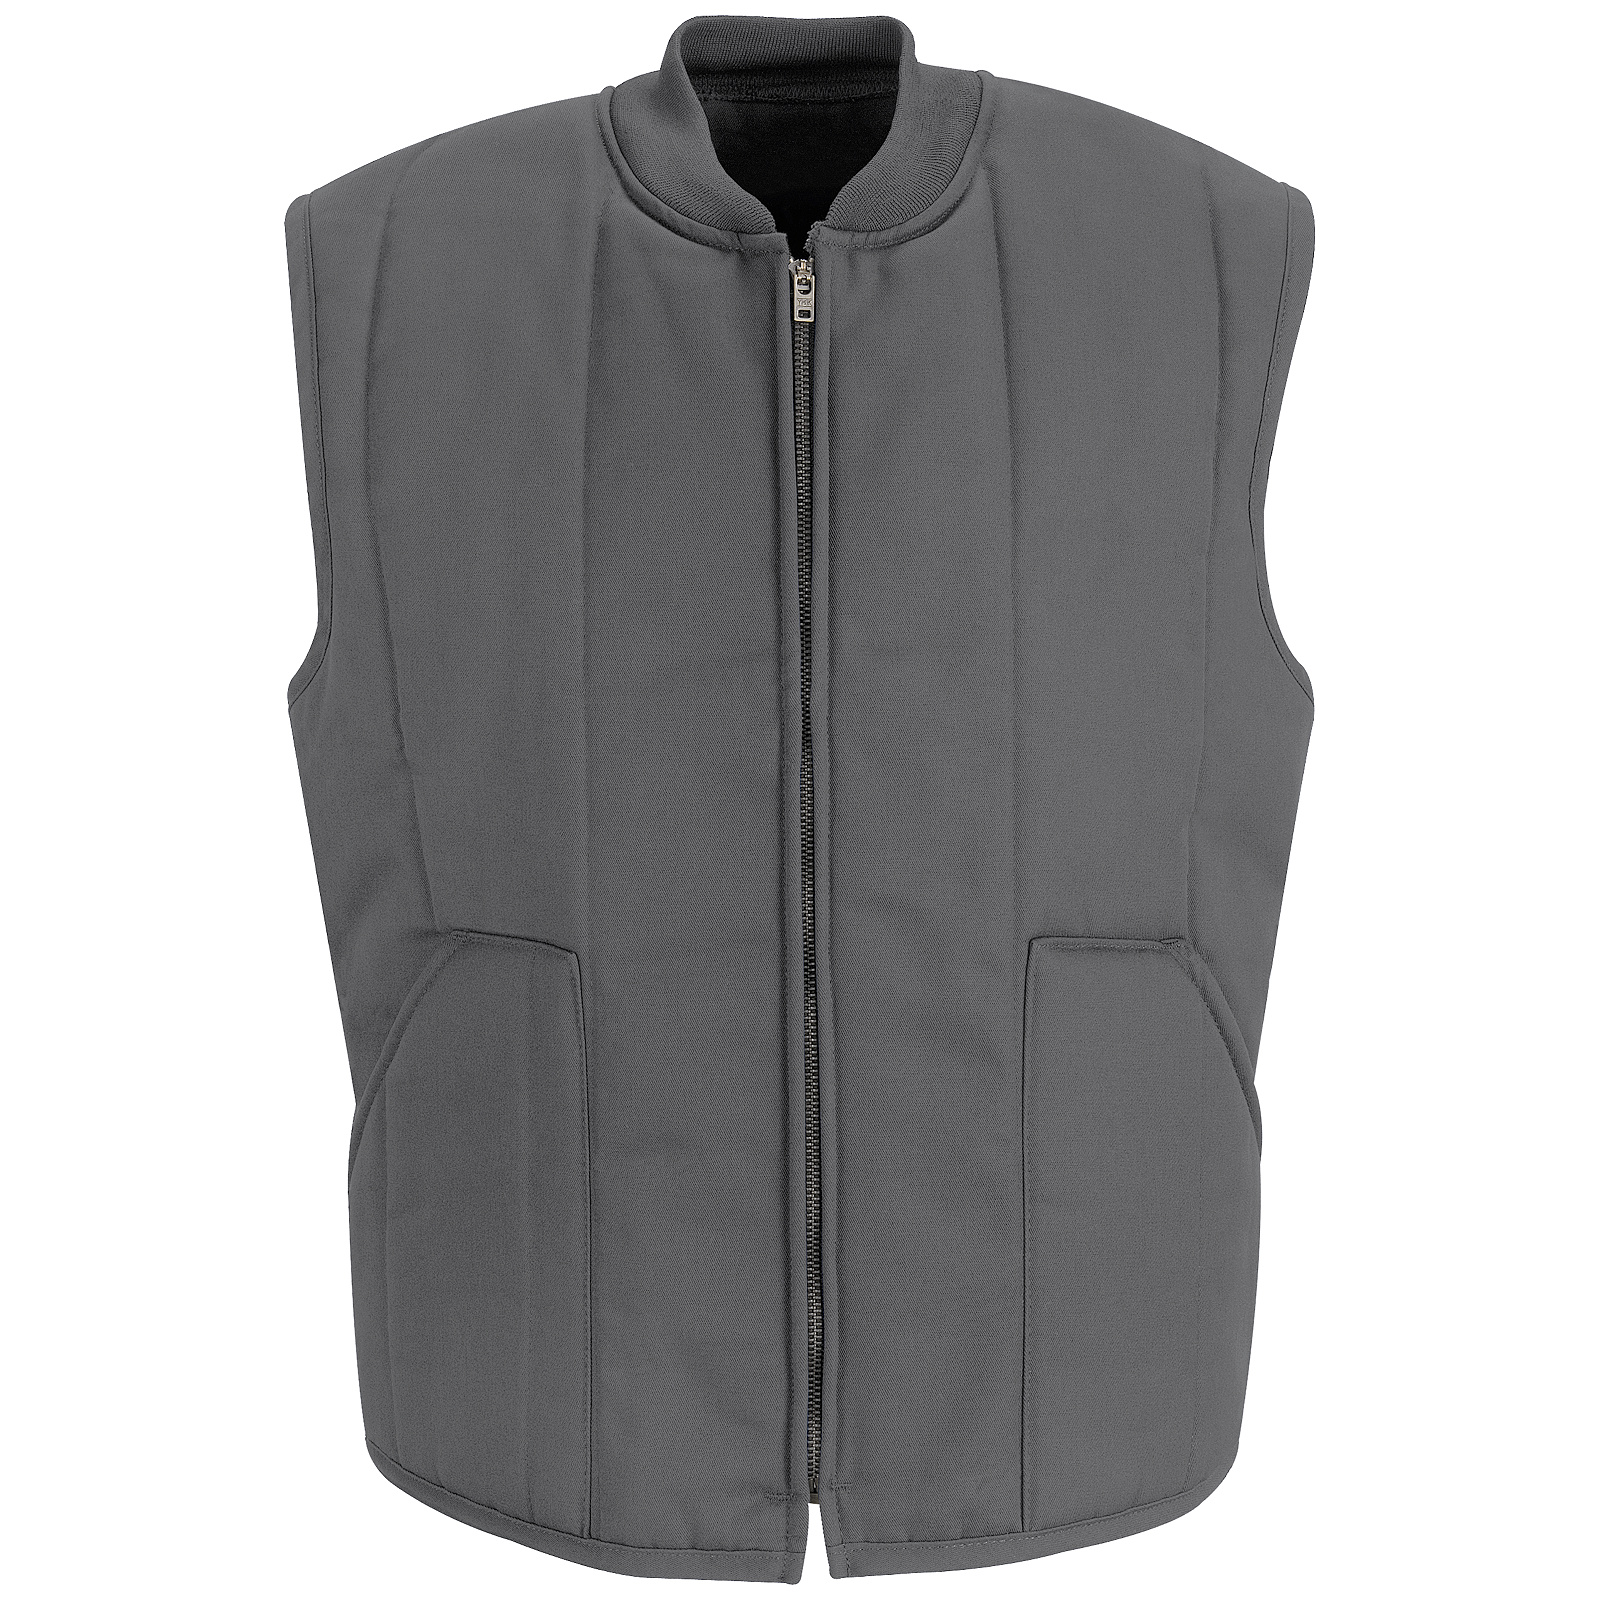 Red Kap® Quilted Vest - image 1 of 4